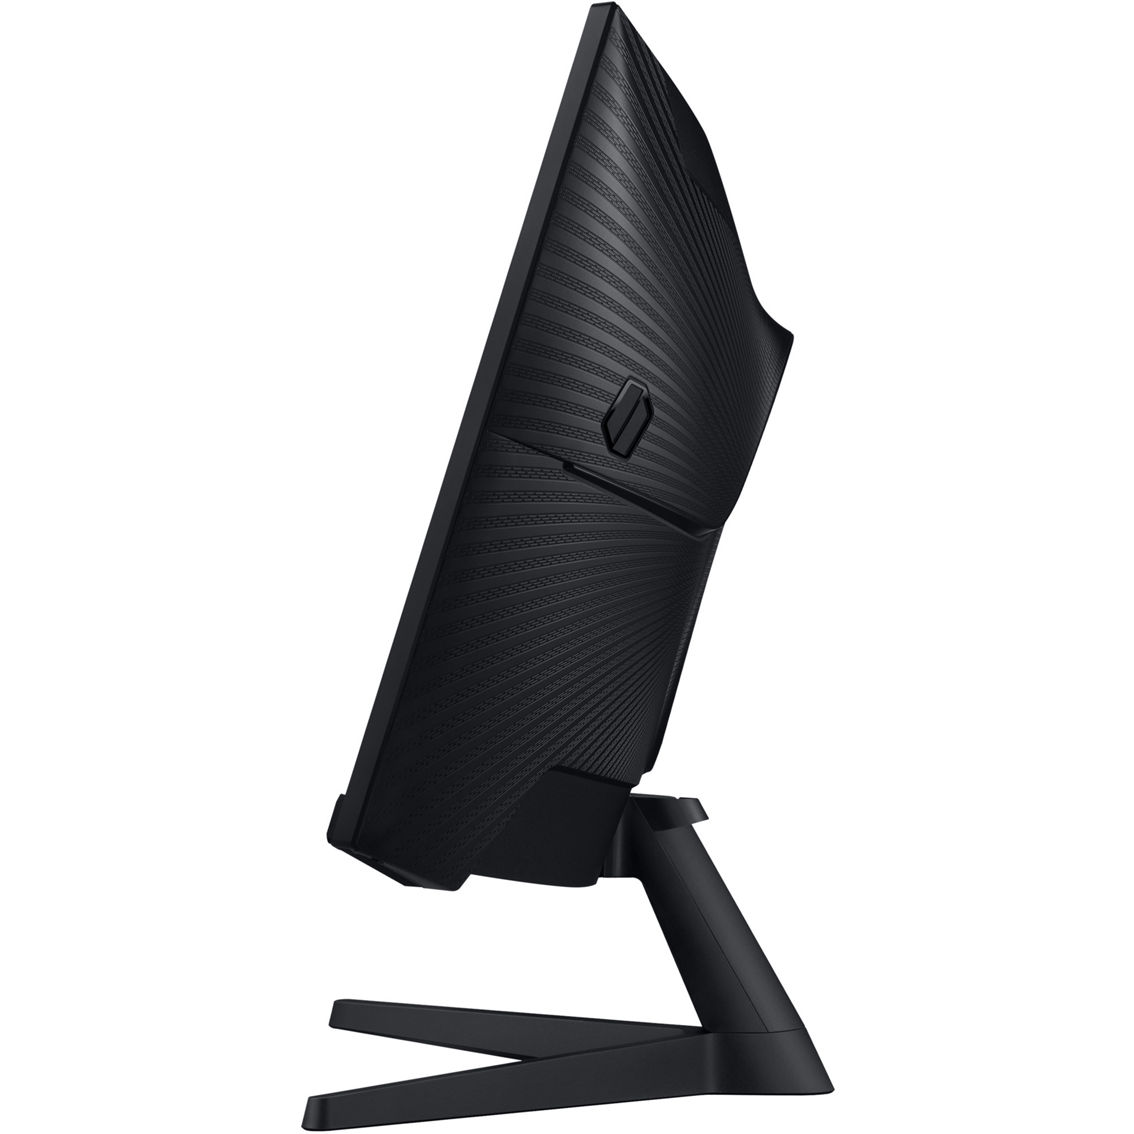 Samsung 34 in. Odyssey G55T WQHD 165Hz 1ms HDR Curved Gaming Monitor - Image 3 of 6